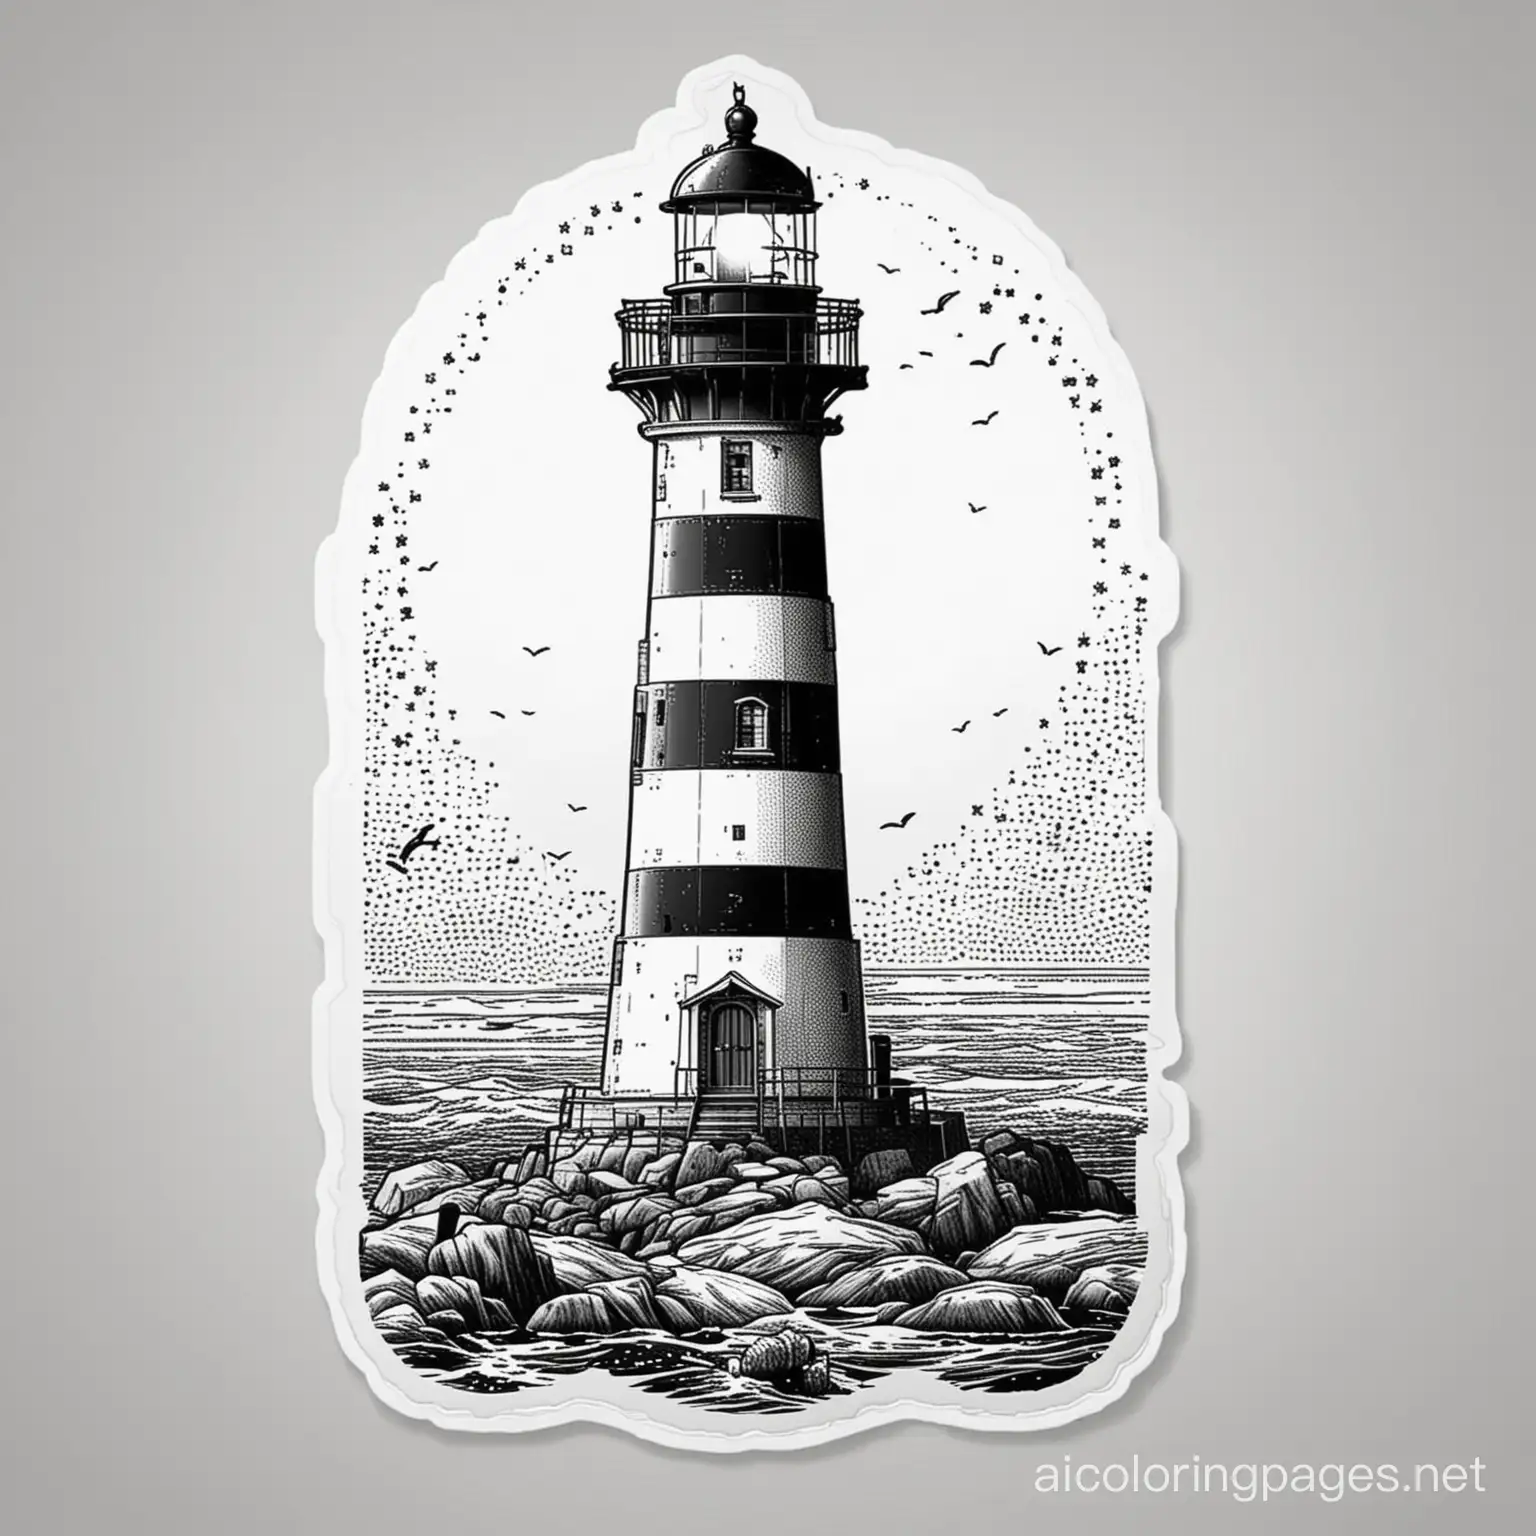 STICKER, ((halftone screen image)) of a lighthouse with a transparent background, Coloring Page, black and white, line art, white background, Simplicity, Ample White Space. The background of the coloring page is plain white to make it easy for young children to color within the lines. The outlines of all the subjects are easy to distinguish, making it simple for kids to color without too much difficulty